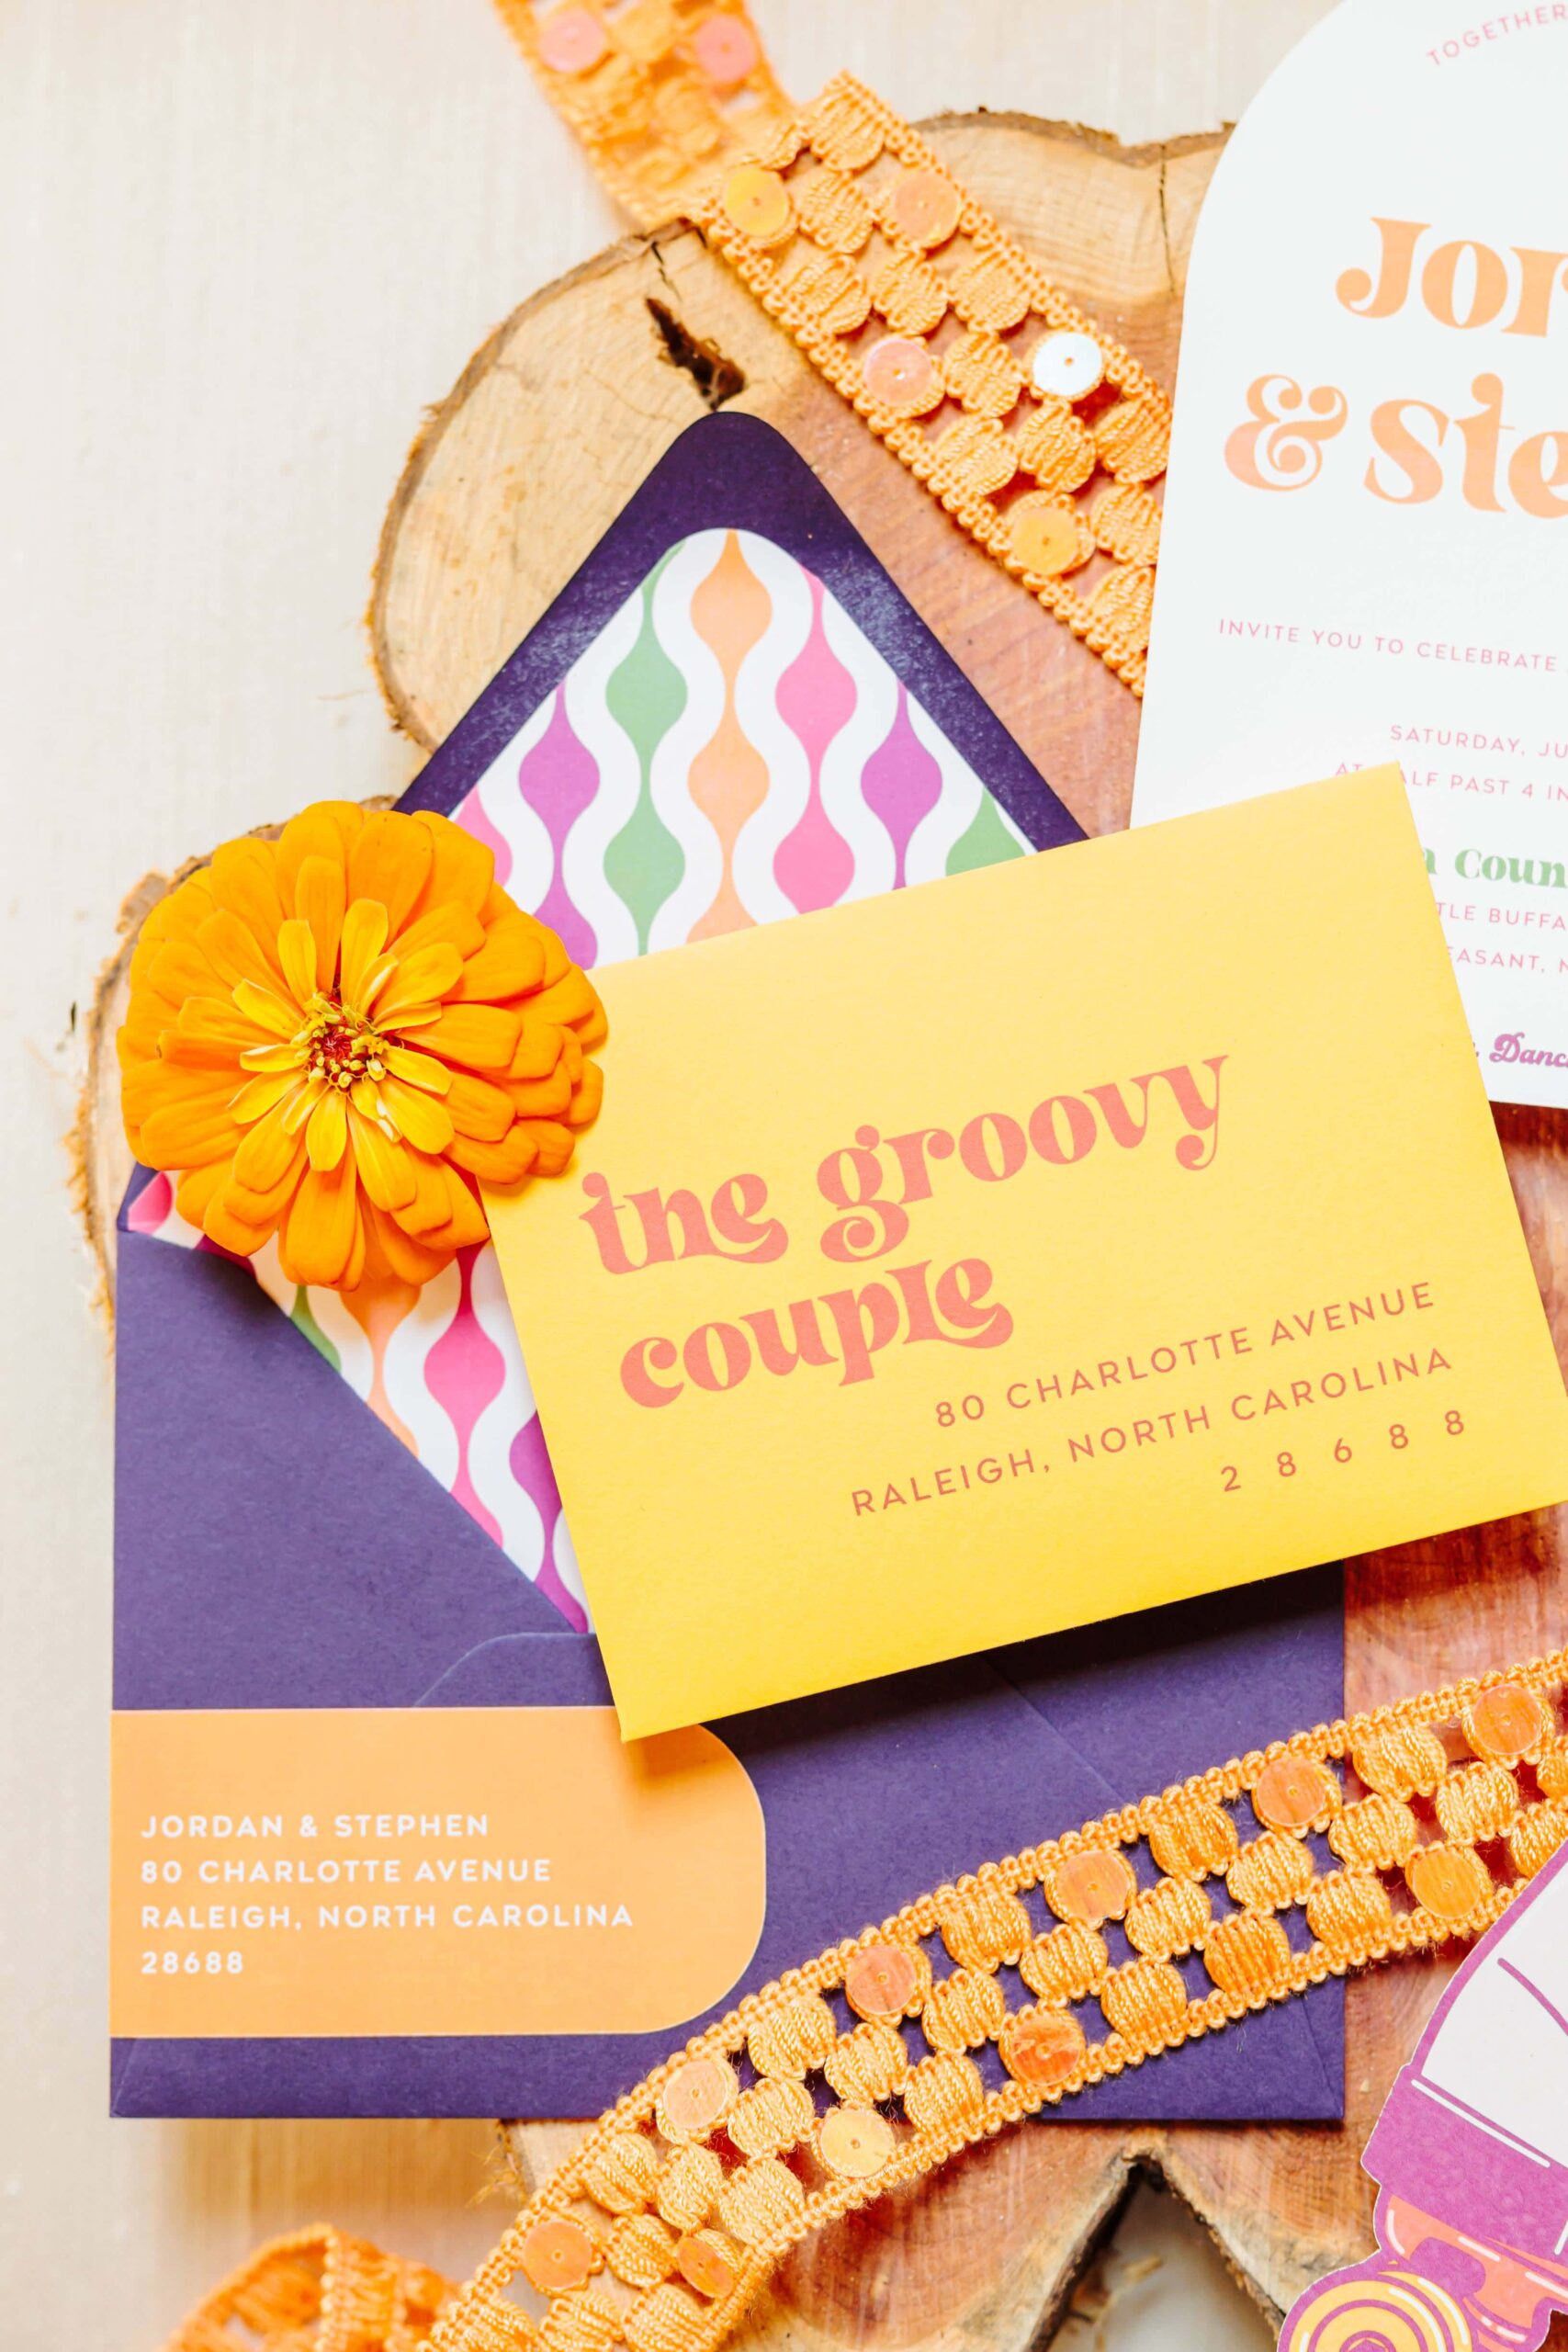 The wedding suite reads "the groovy couple" in a funky font with bright yellow, purple, and orange colors.